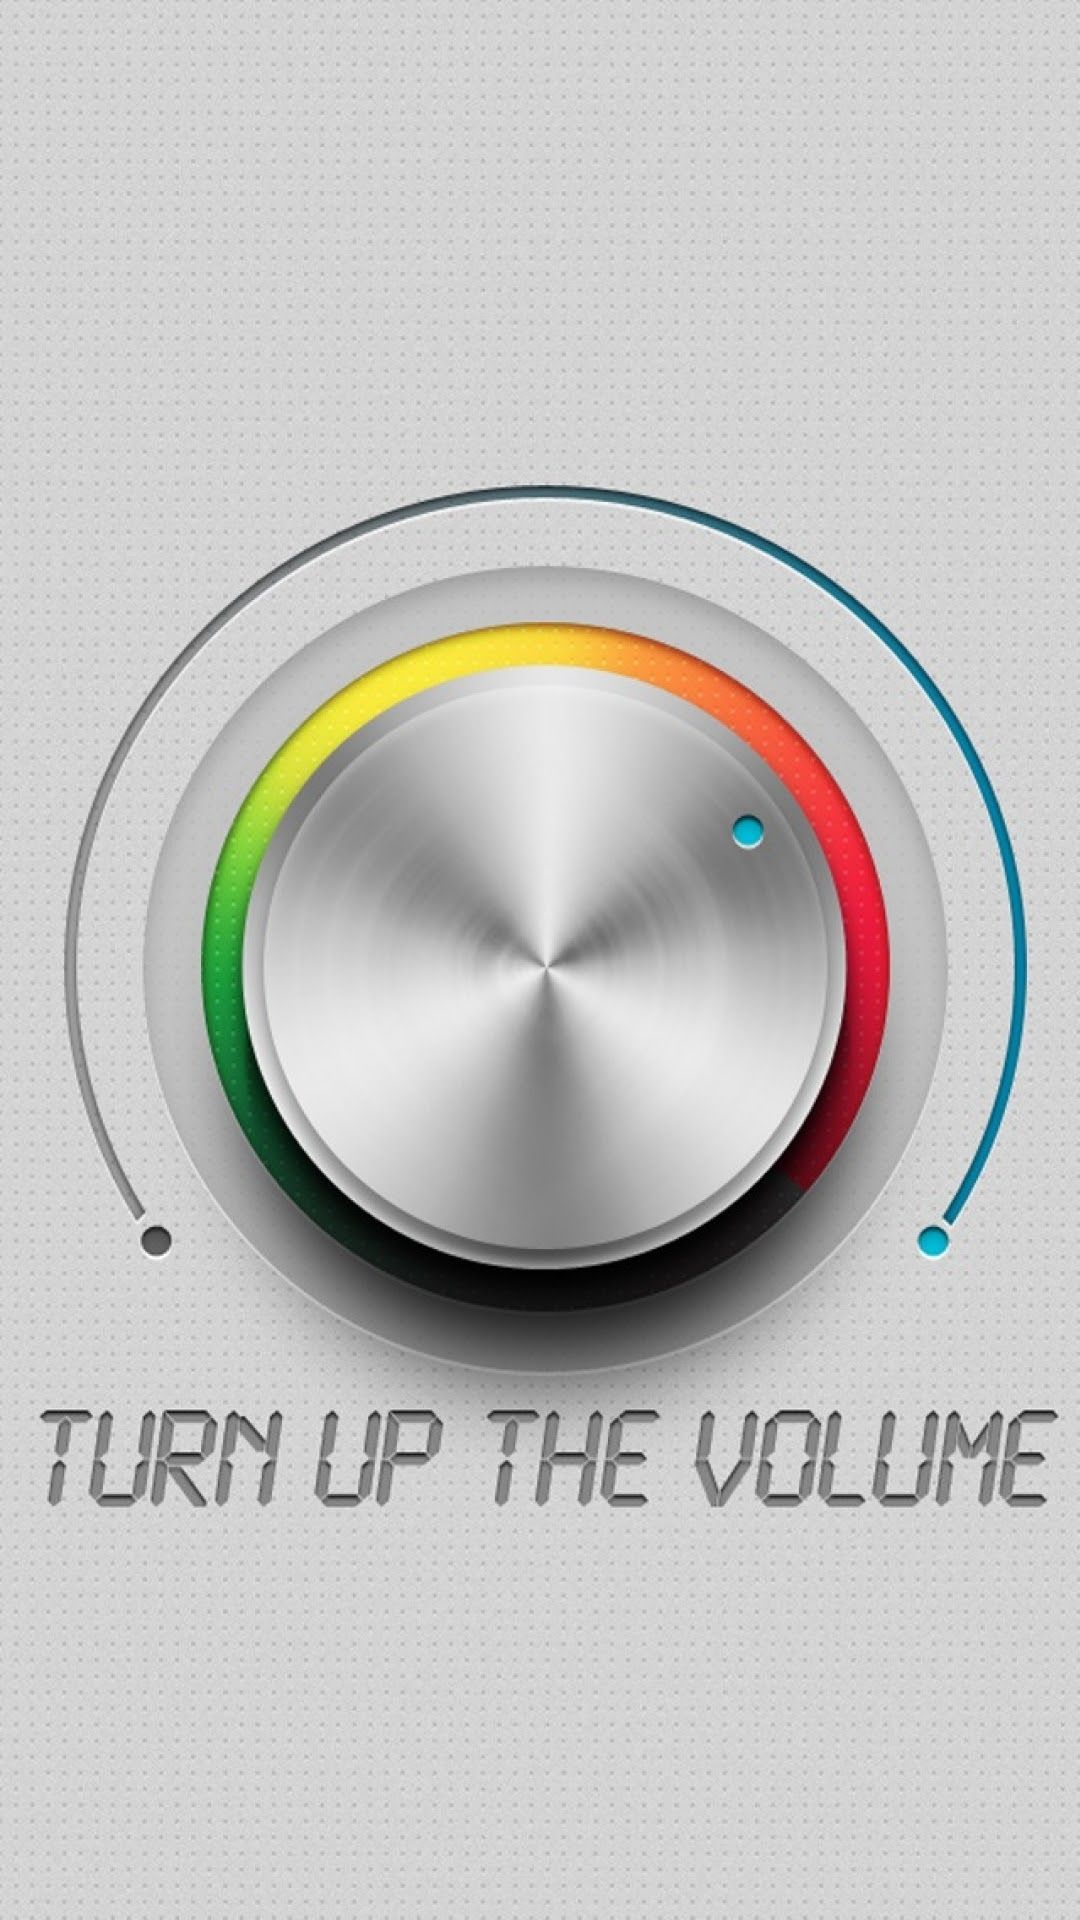 Android Best Wallpaper: Turn Up The Volume Android Best Wallpaper